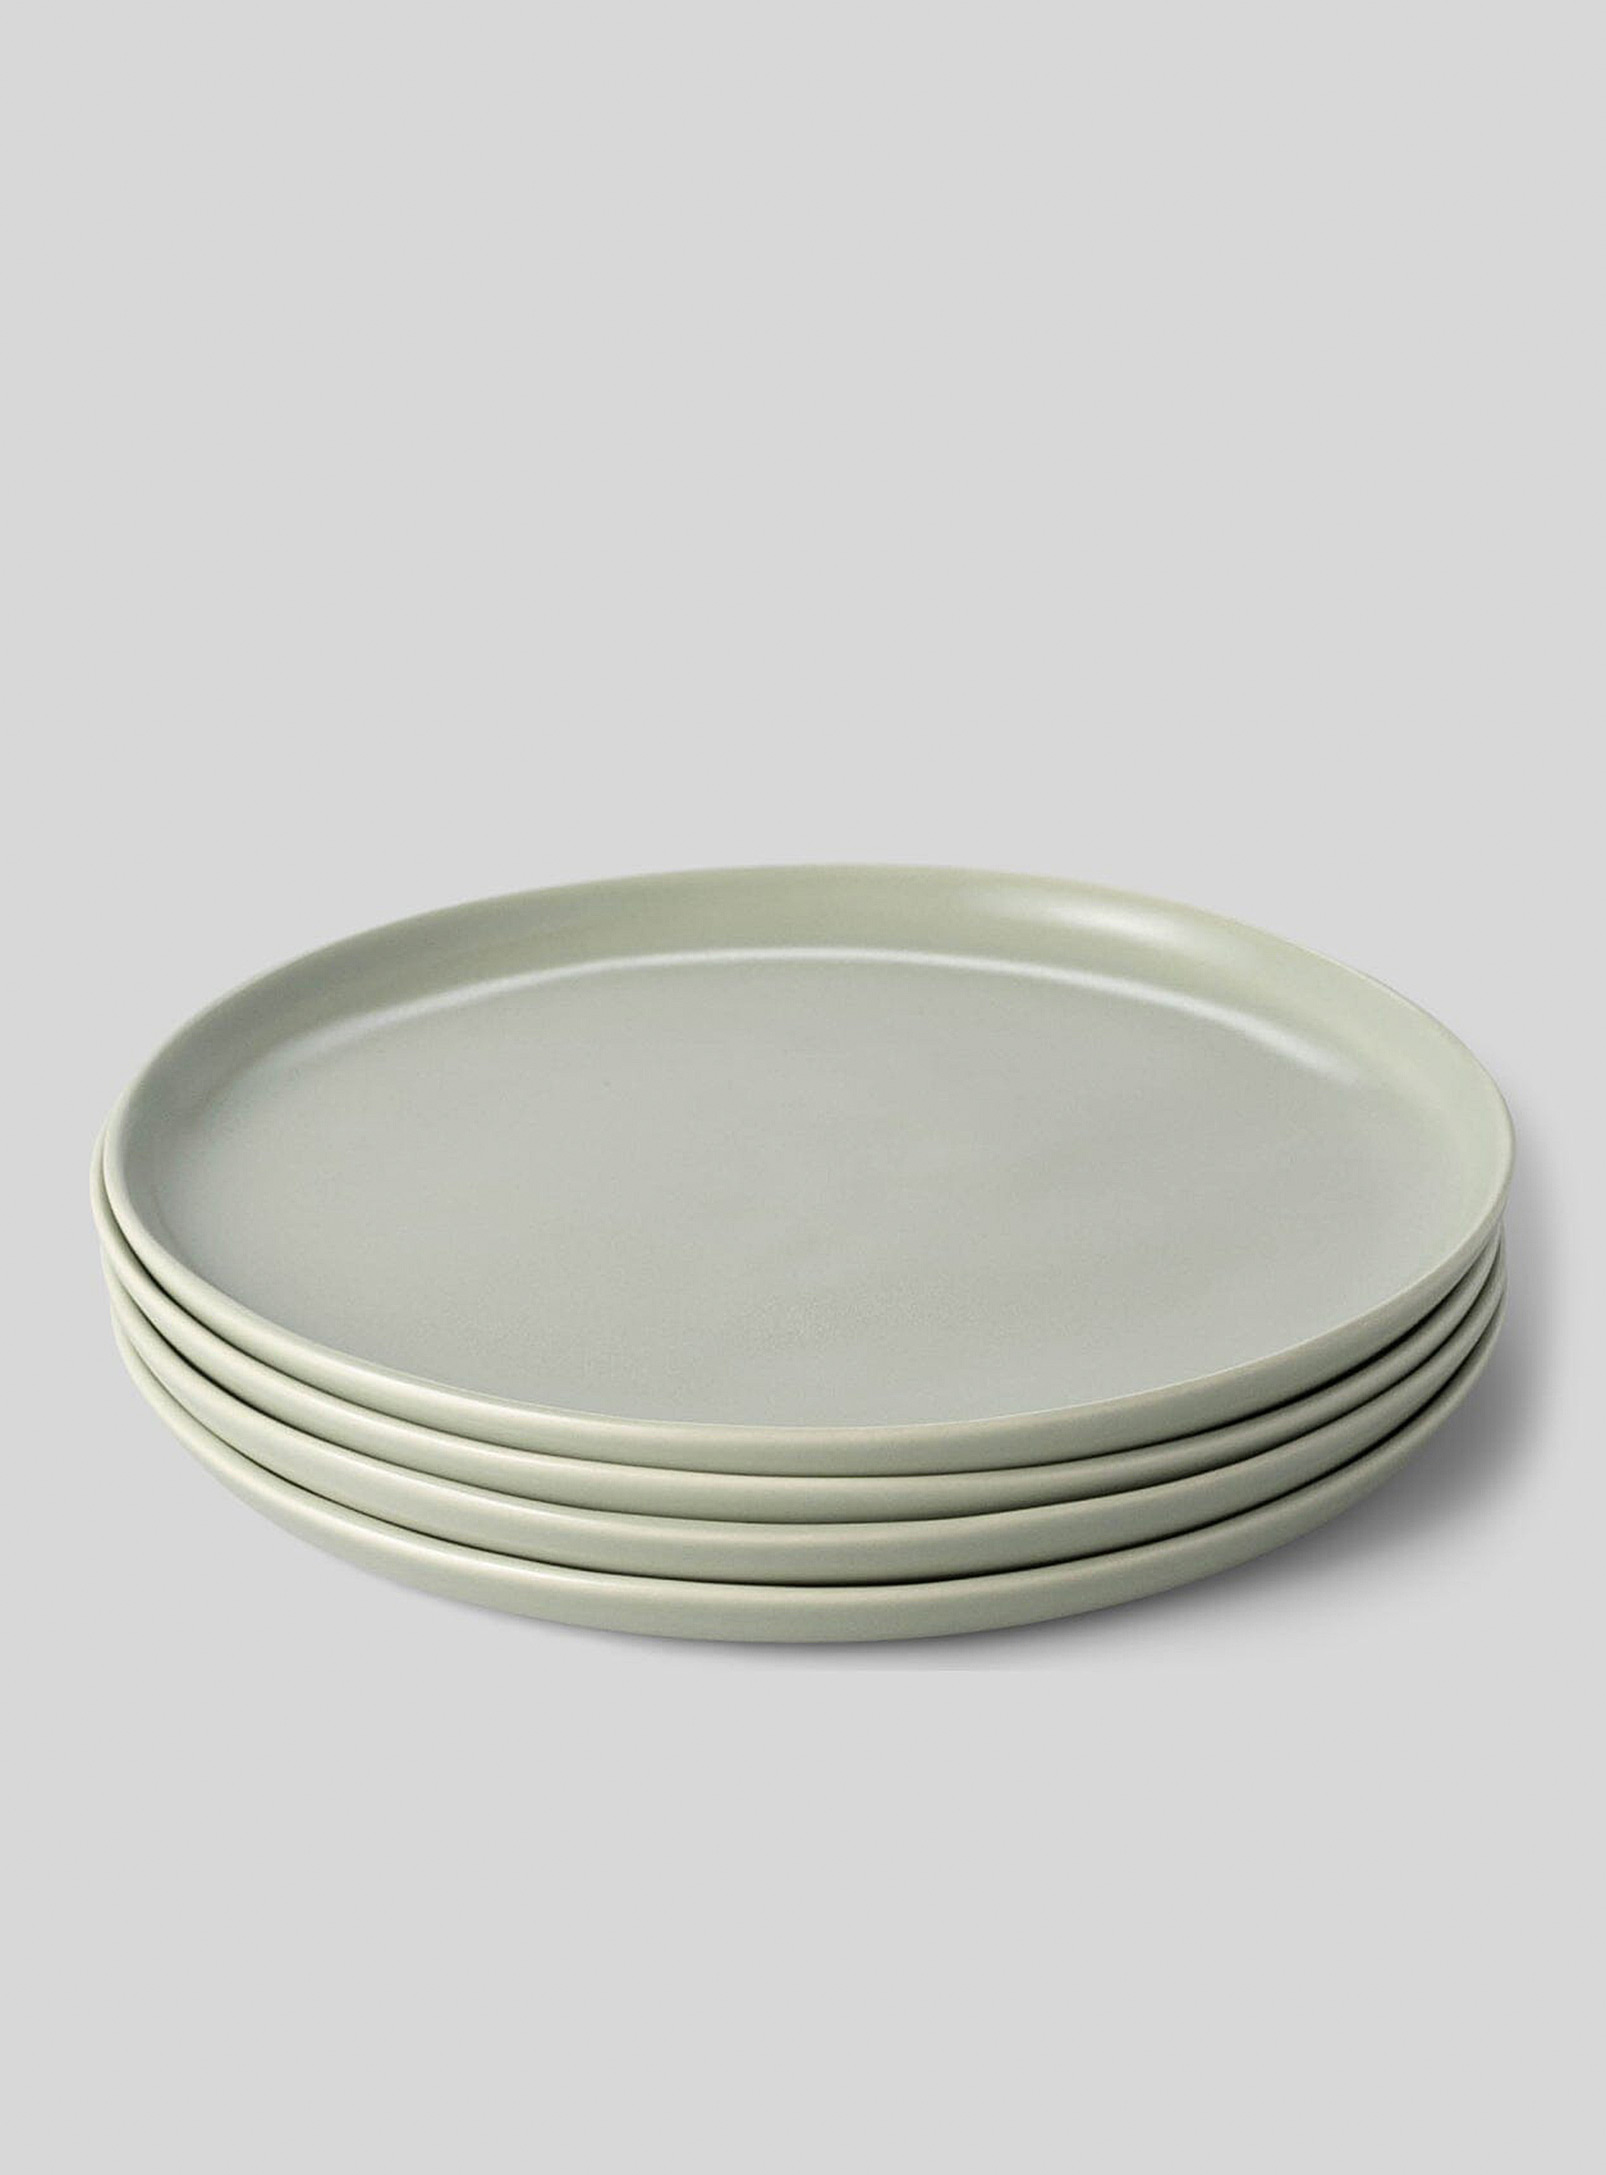 Fable Minimalist Stoneware Dinner Plates Set Of 4 In Green